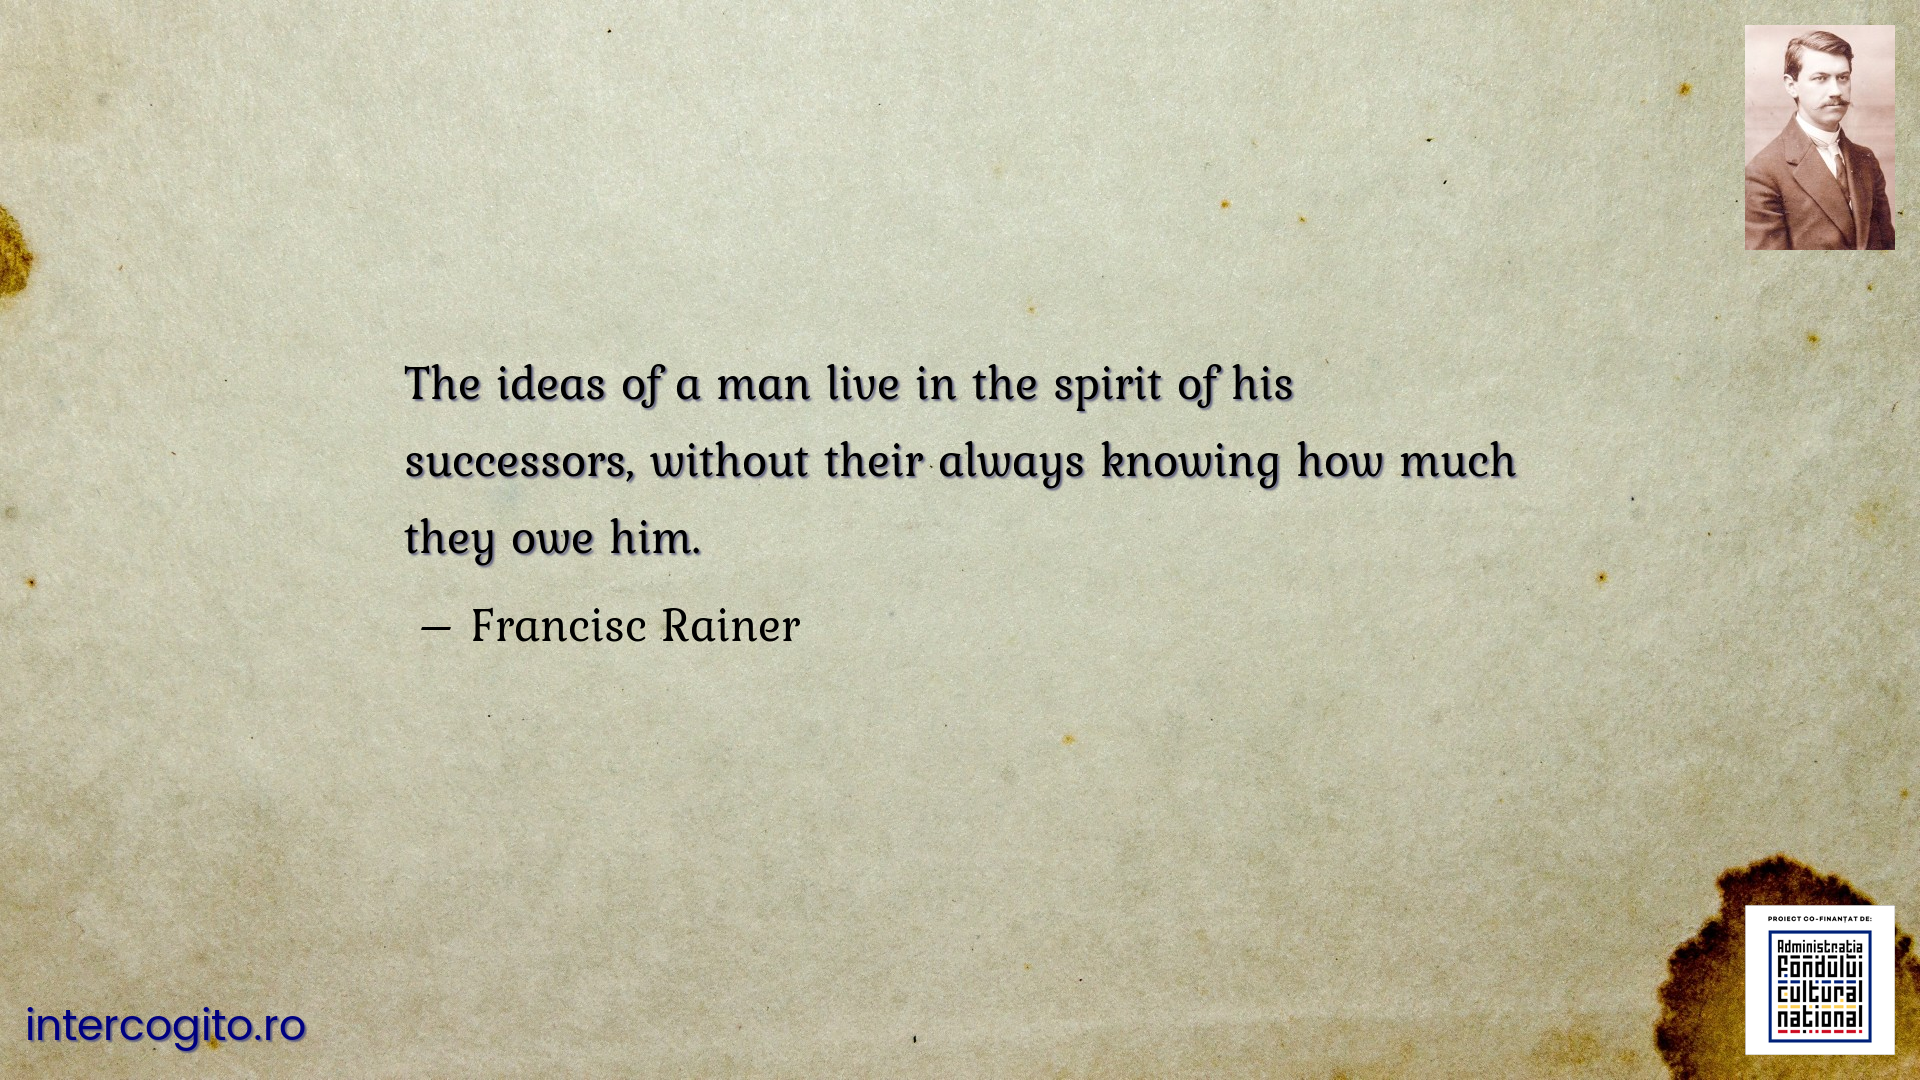 The ideas of a man live in the spirit of his successors, without their always knowing how much they owe him.